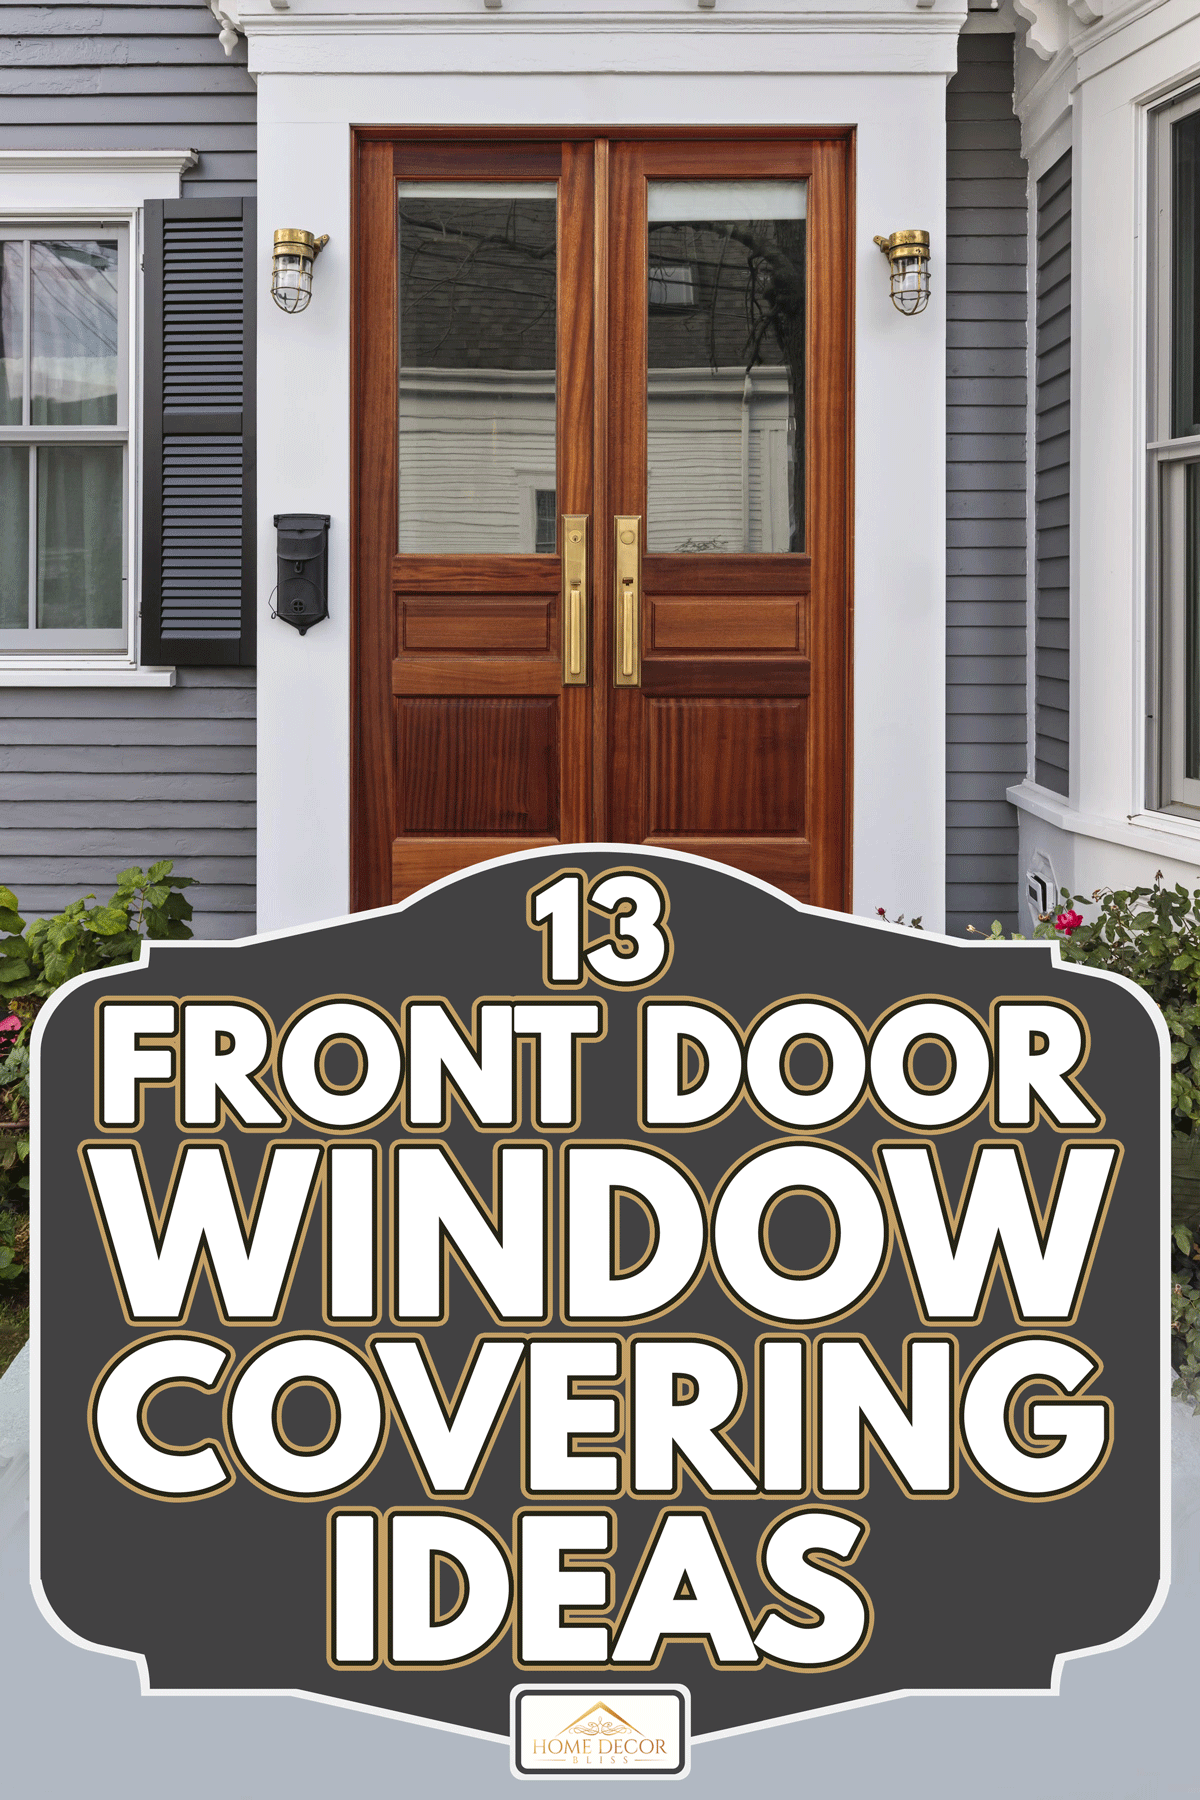 Double brown front door with a secured front entrance, 13 Front Door Window Covering Ideas